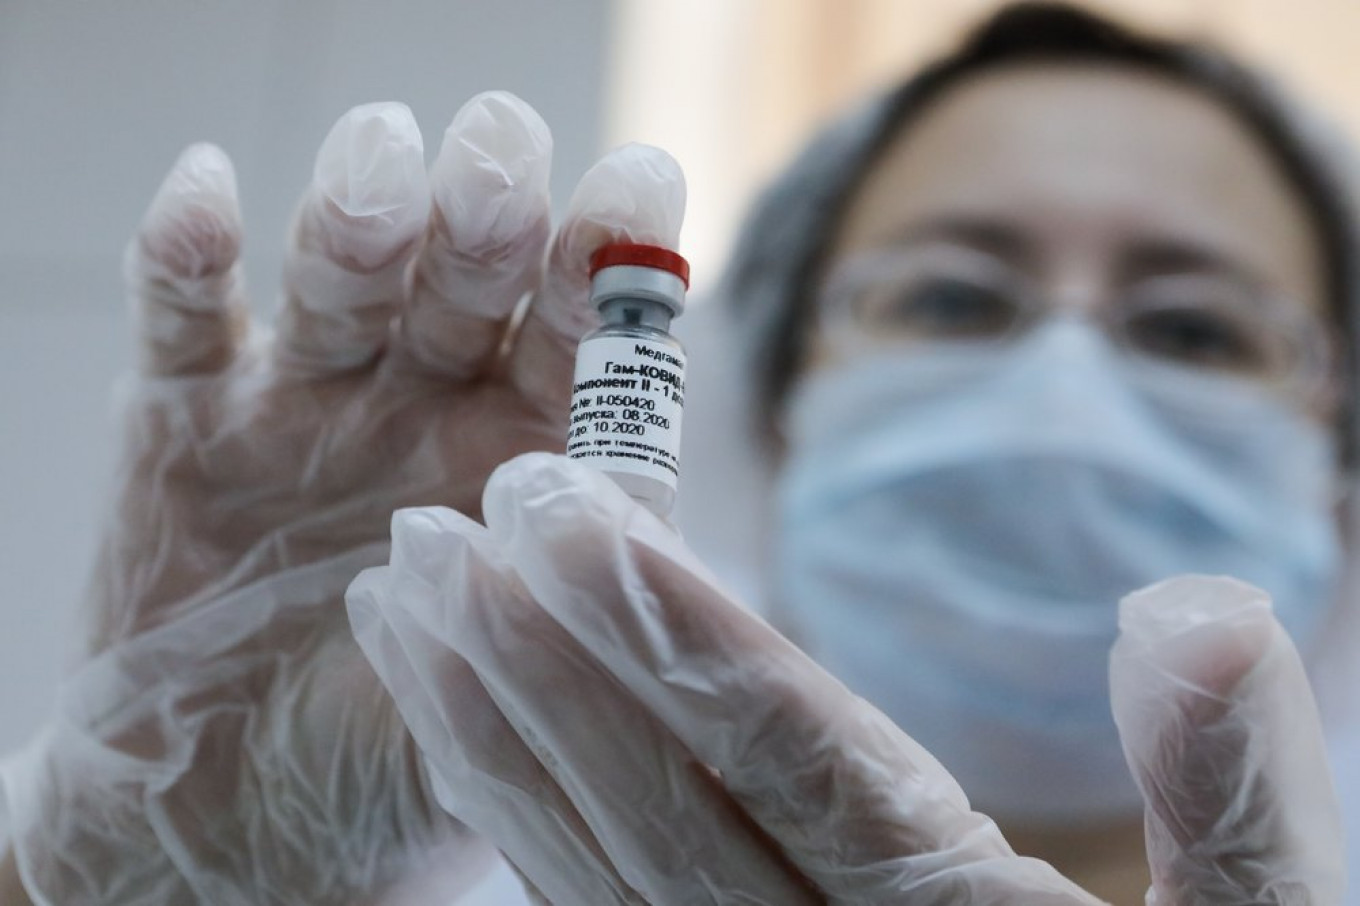 Russia Approves 2nd Coronavirus Vaccine – Putin - The Moscow Times